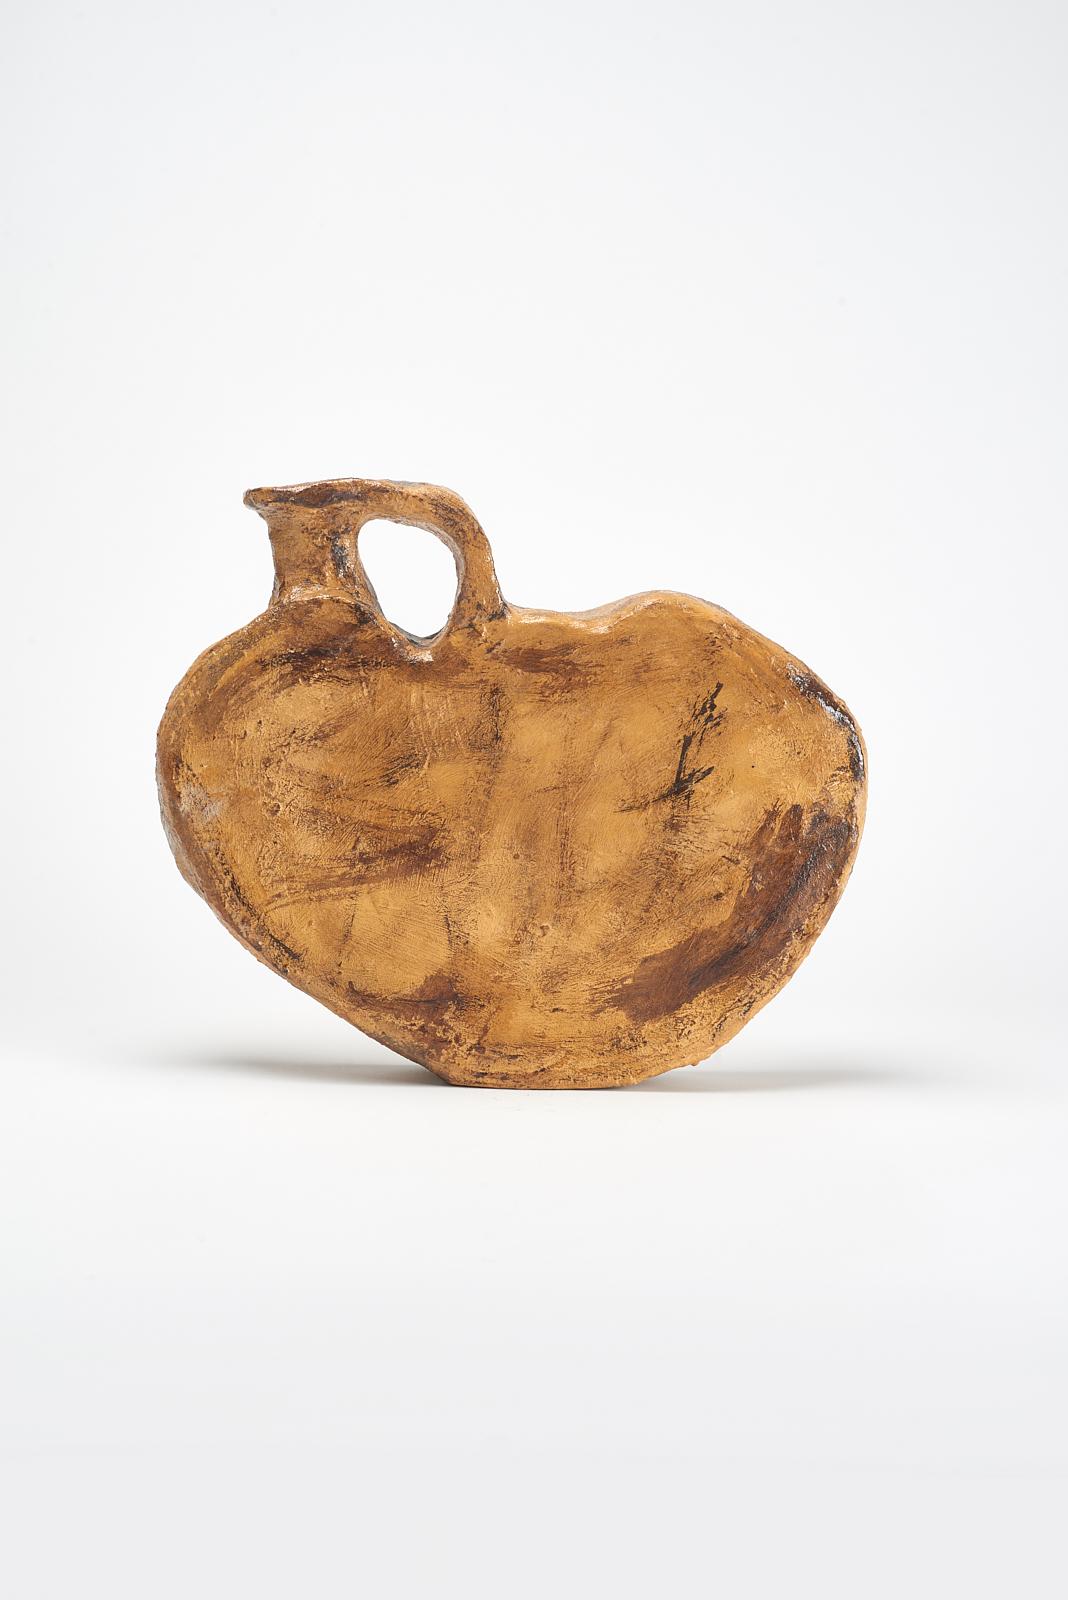 Alka Vase by Willem Van Hooff
Dimensions: W 38 x D 7 x H 28 cm (Dimensions may vary as pieces are hand-made and might present slight variations in sizes)
Materials: earthenware, ceramic, pigments and glaze

Willem van Hooff is a designer based in